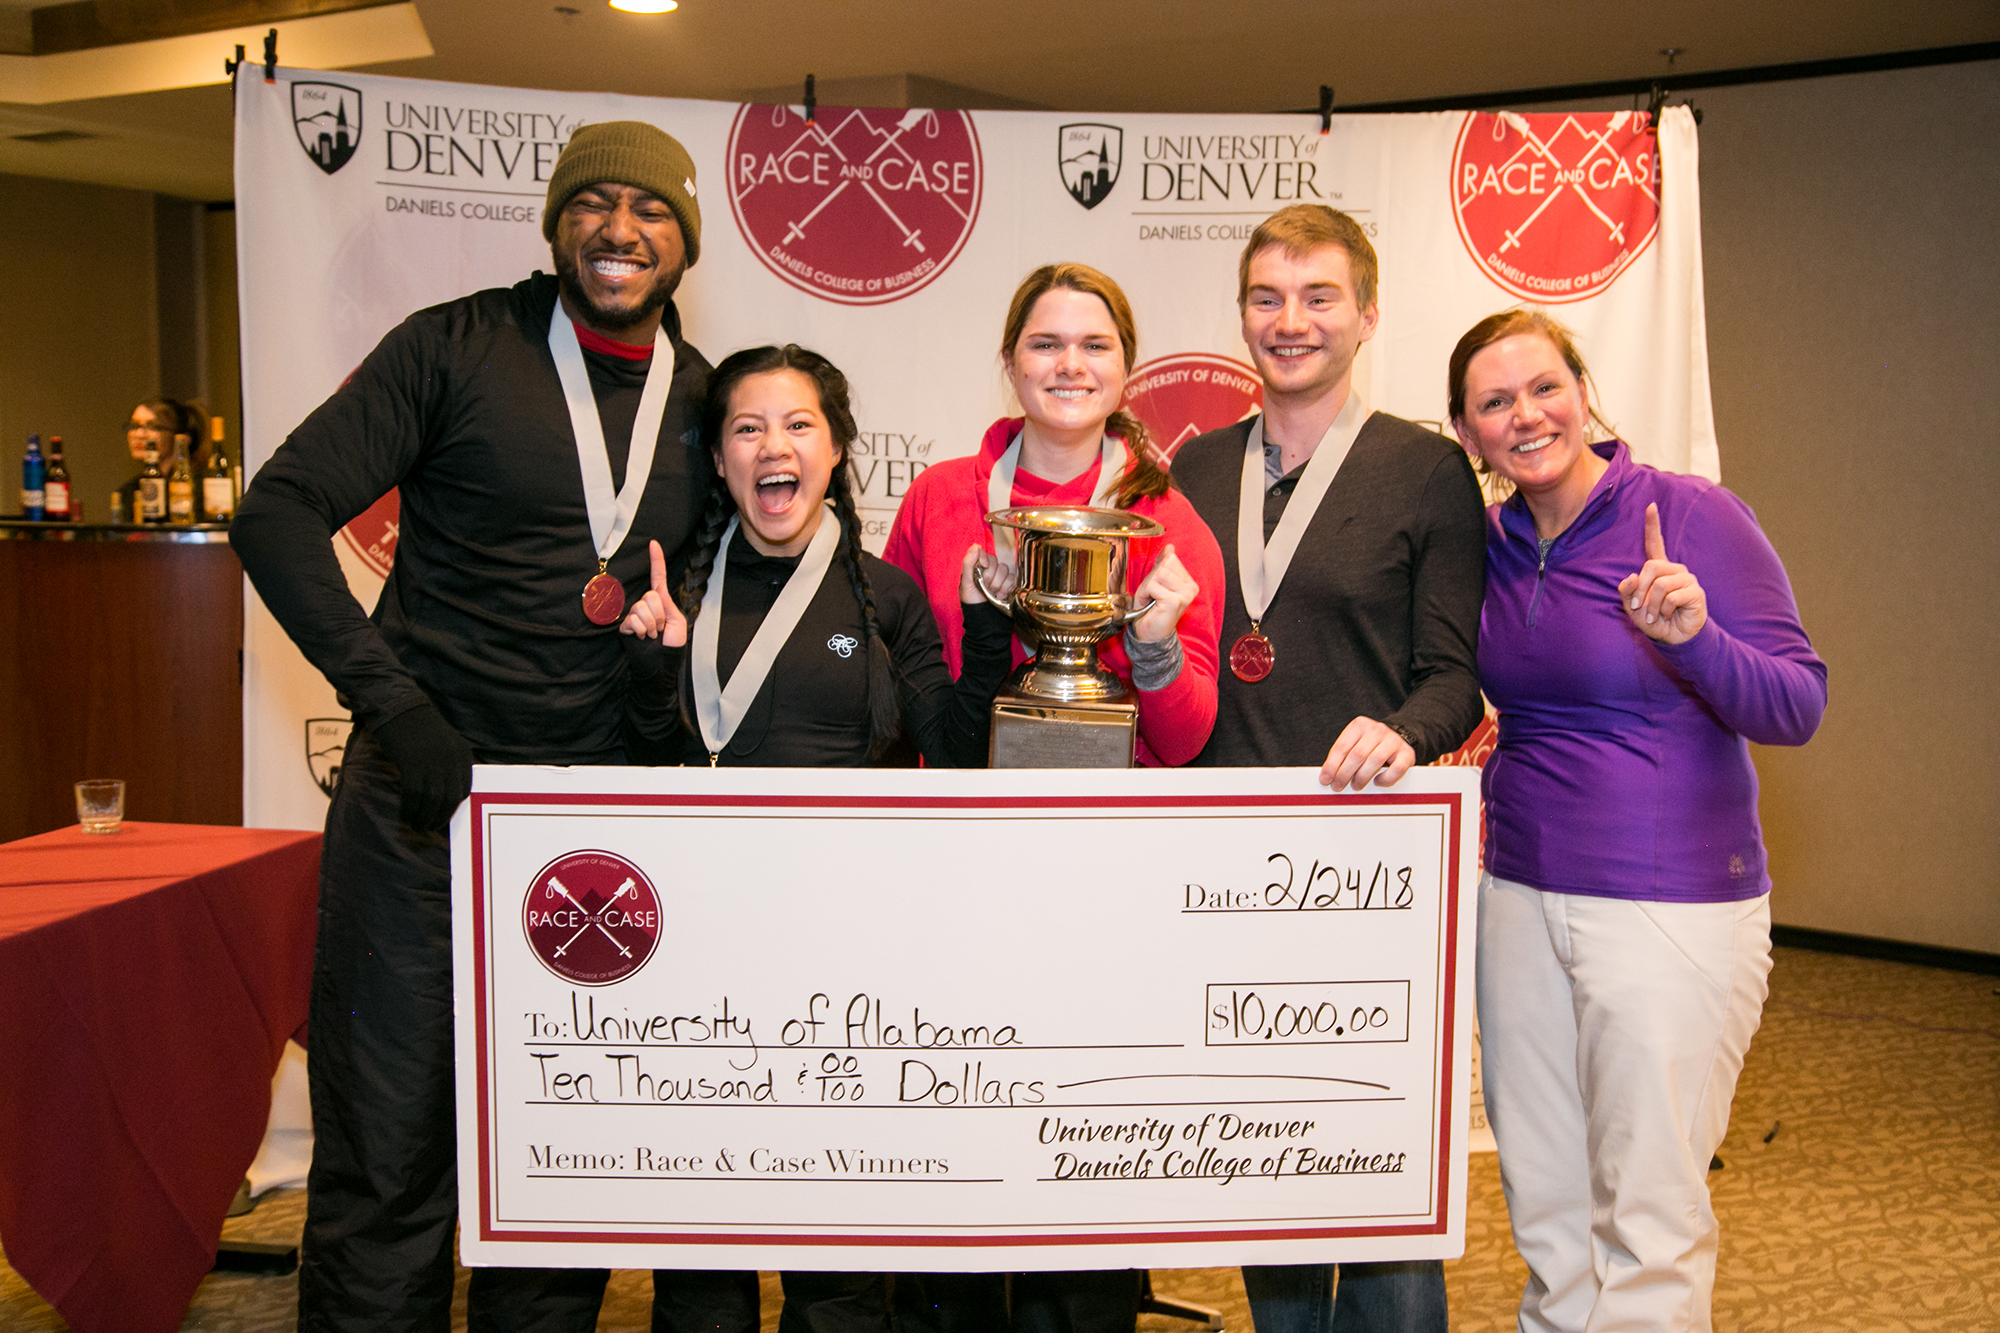 2018 Race and Case Winners from left to right: Myles Ward, Christin Spencer, Liz Alley, and James Ramsey